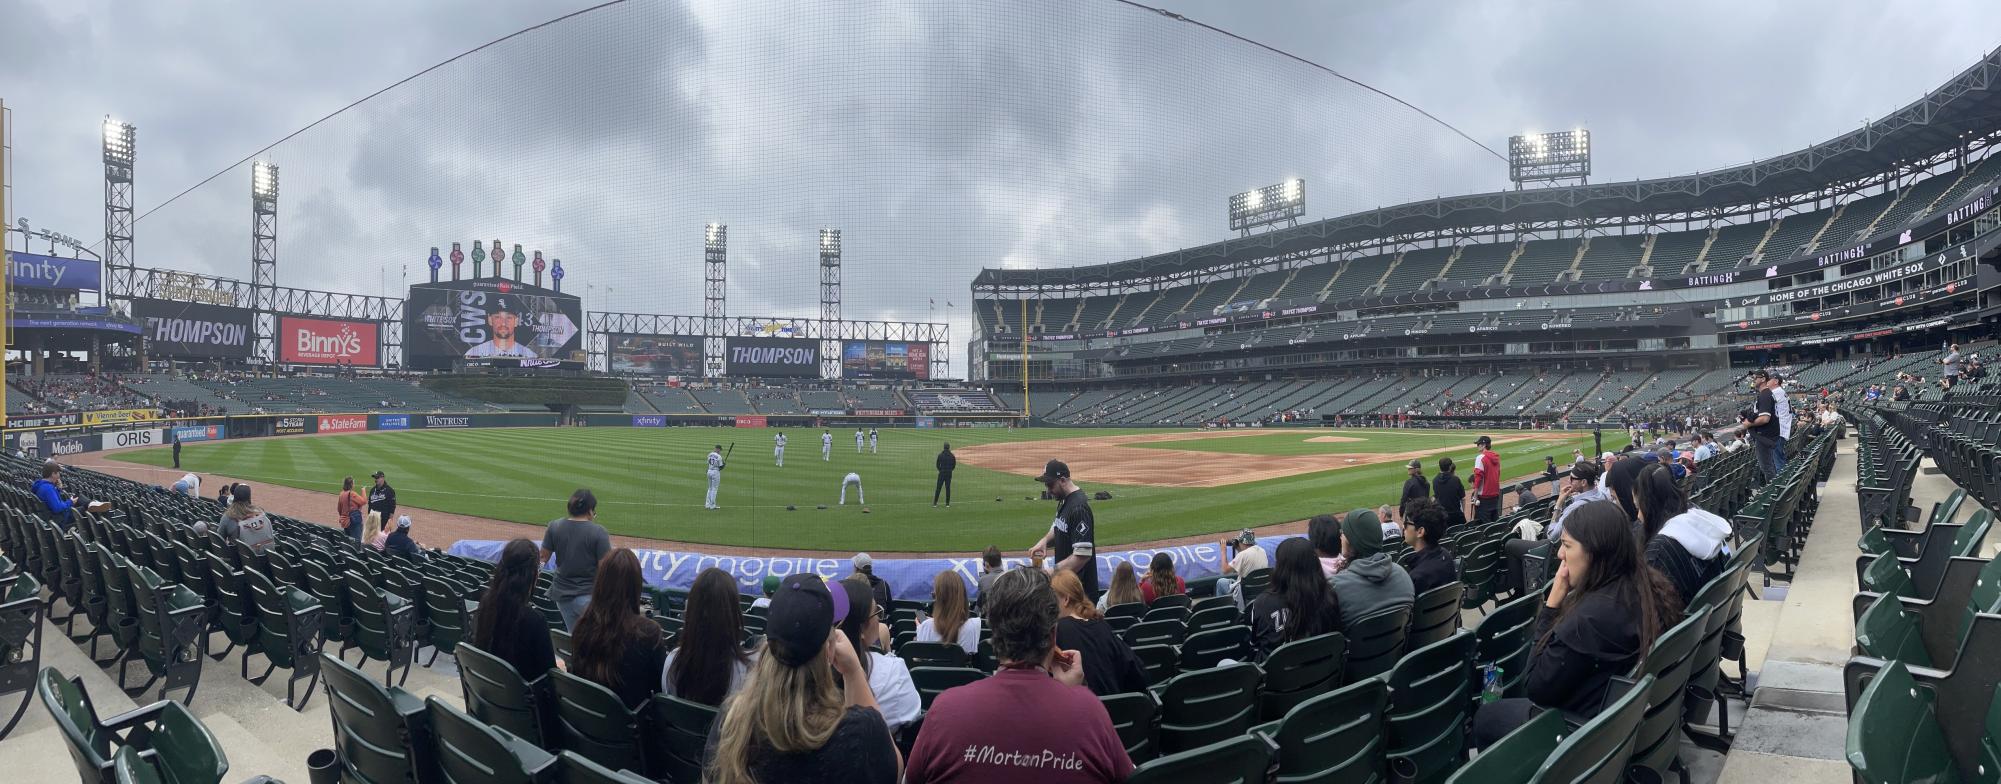 A Day at the Ballpark: To Learn